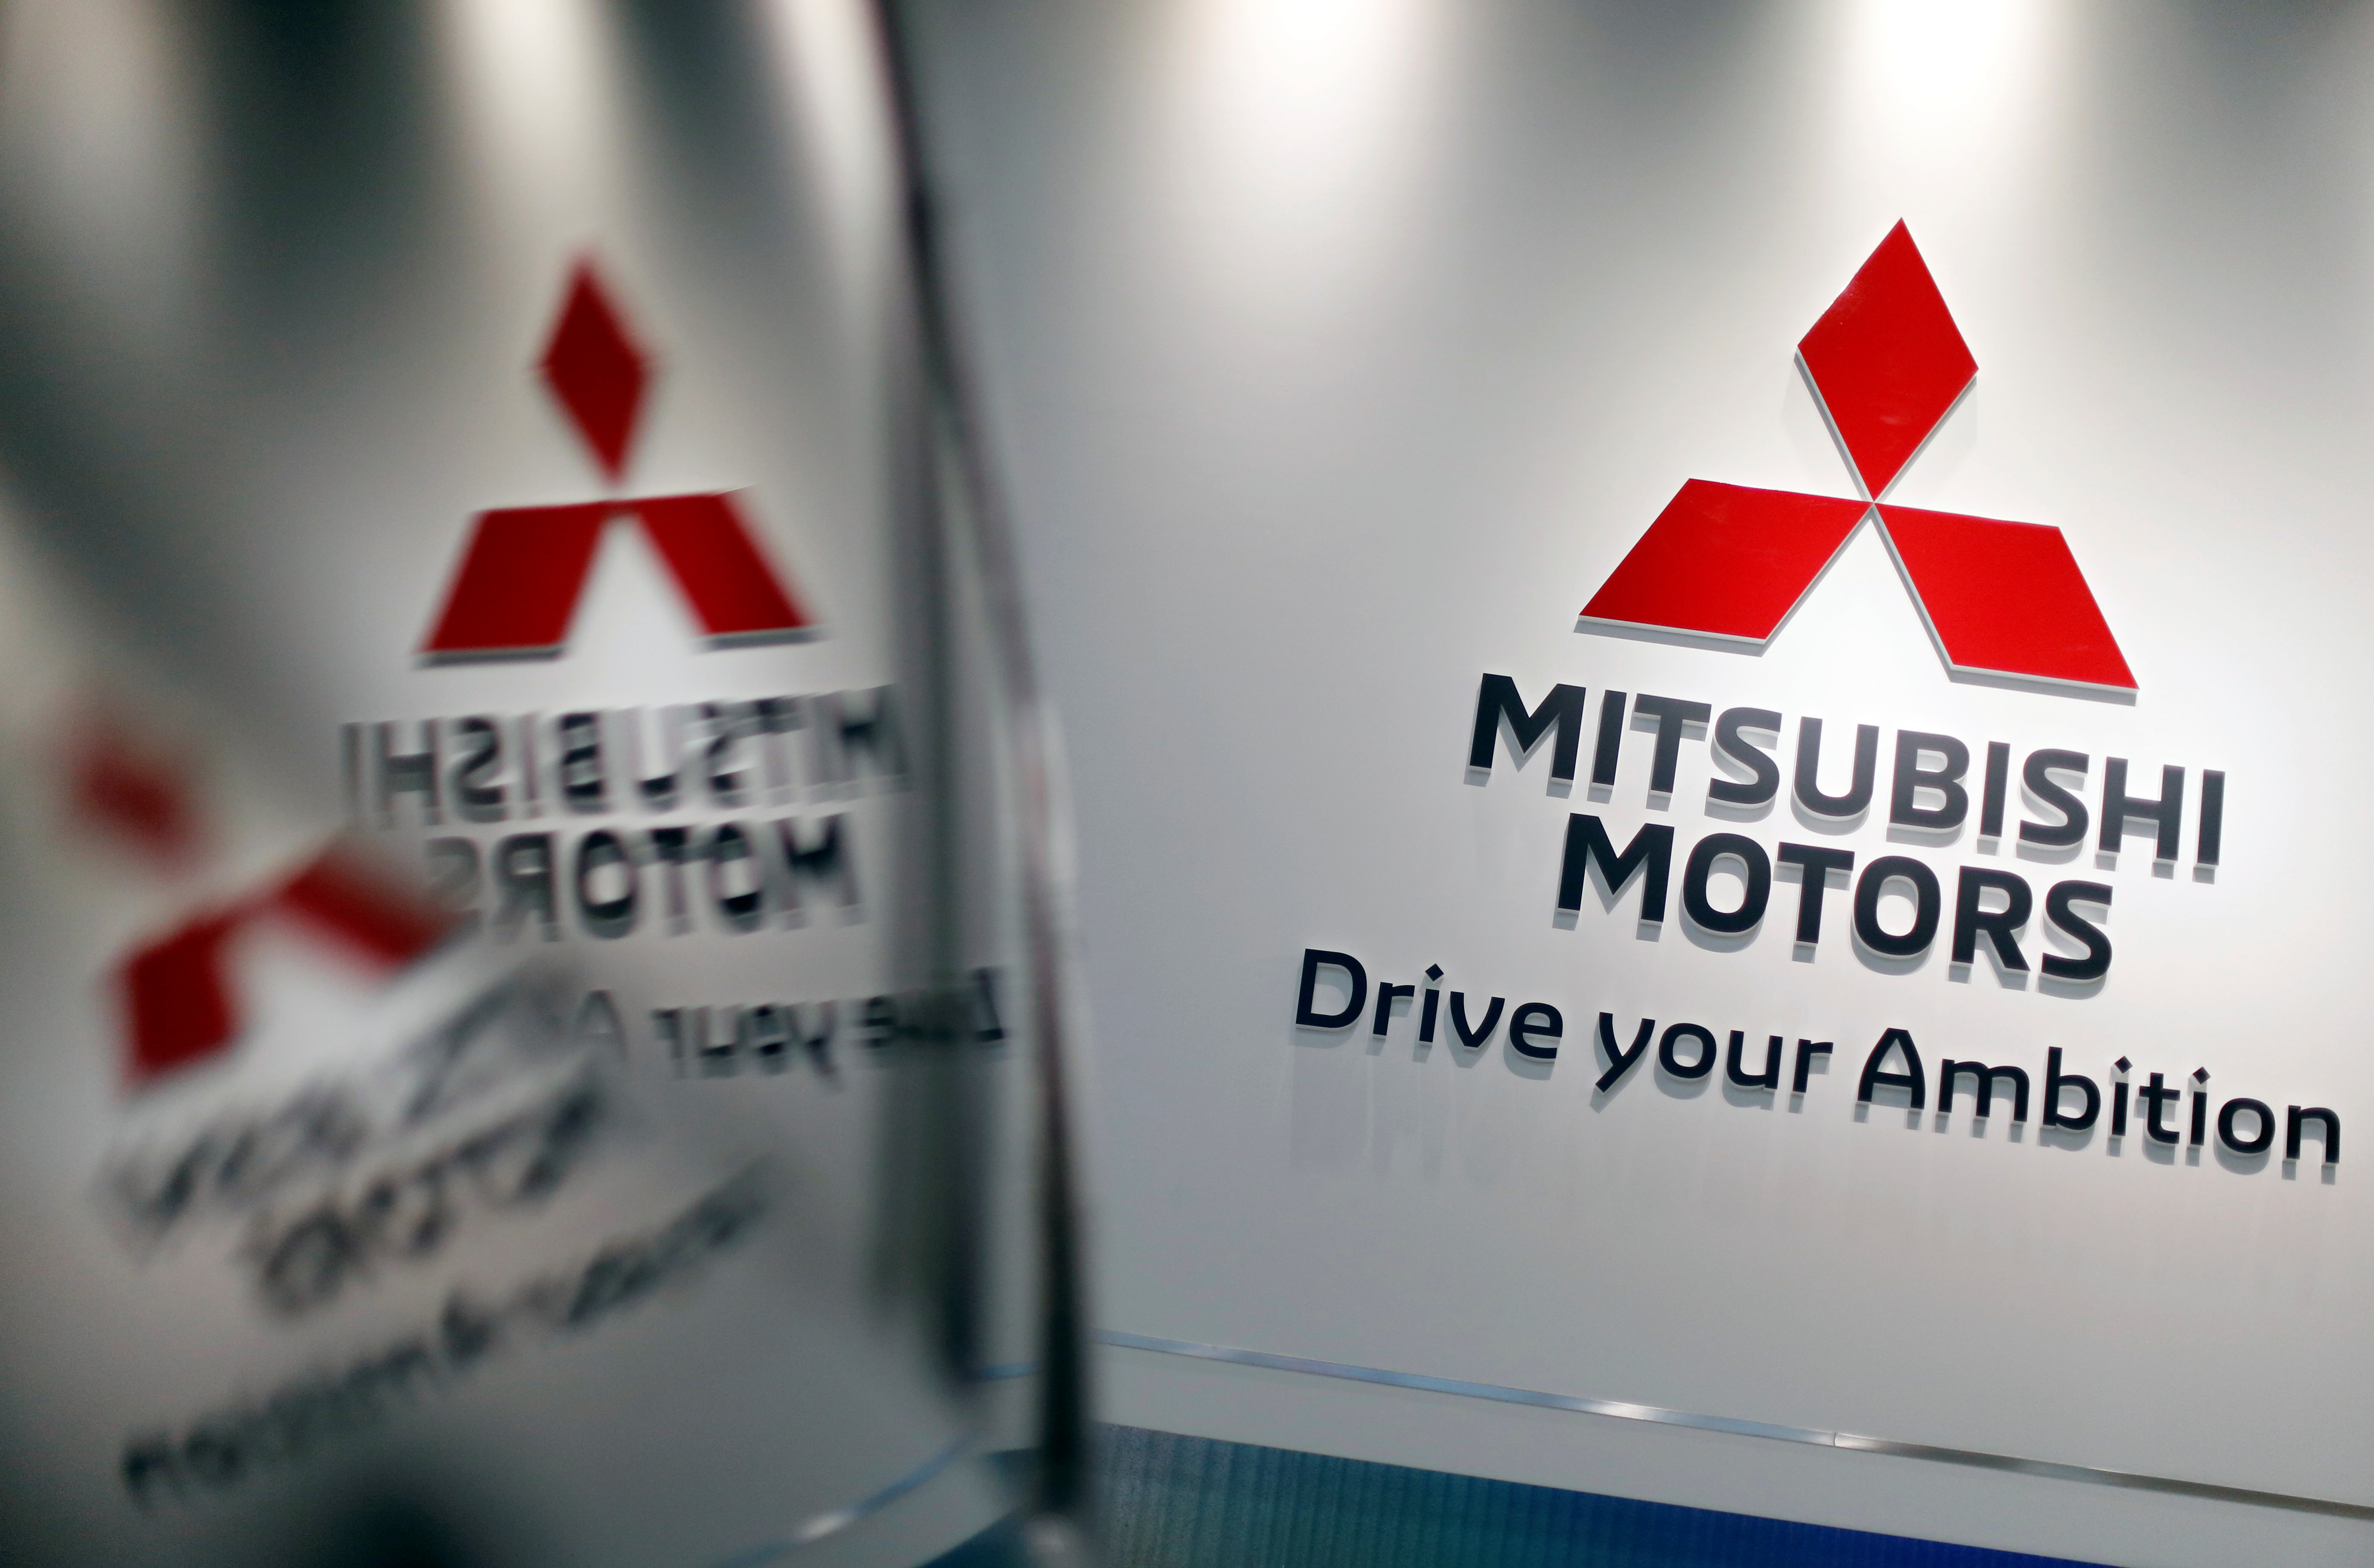 The logo of Mitsubishi Motors Corp is displayed at the company's showroom in Tokyo